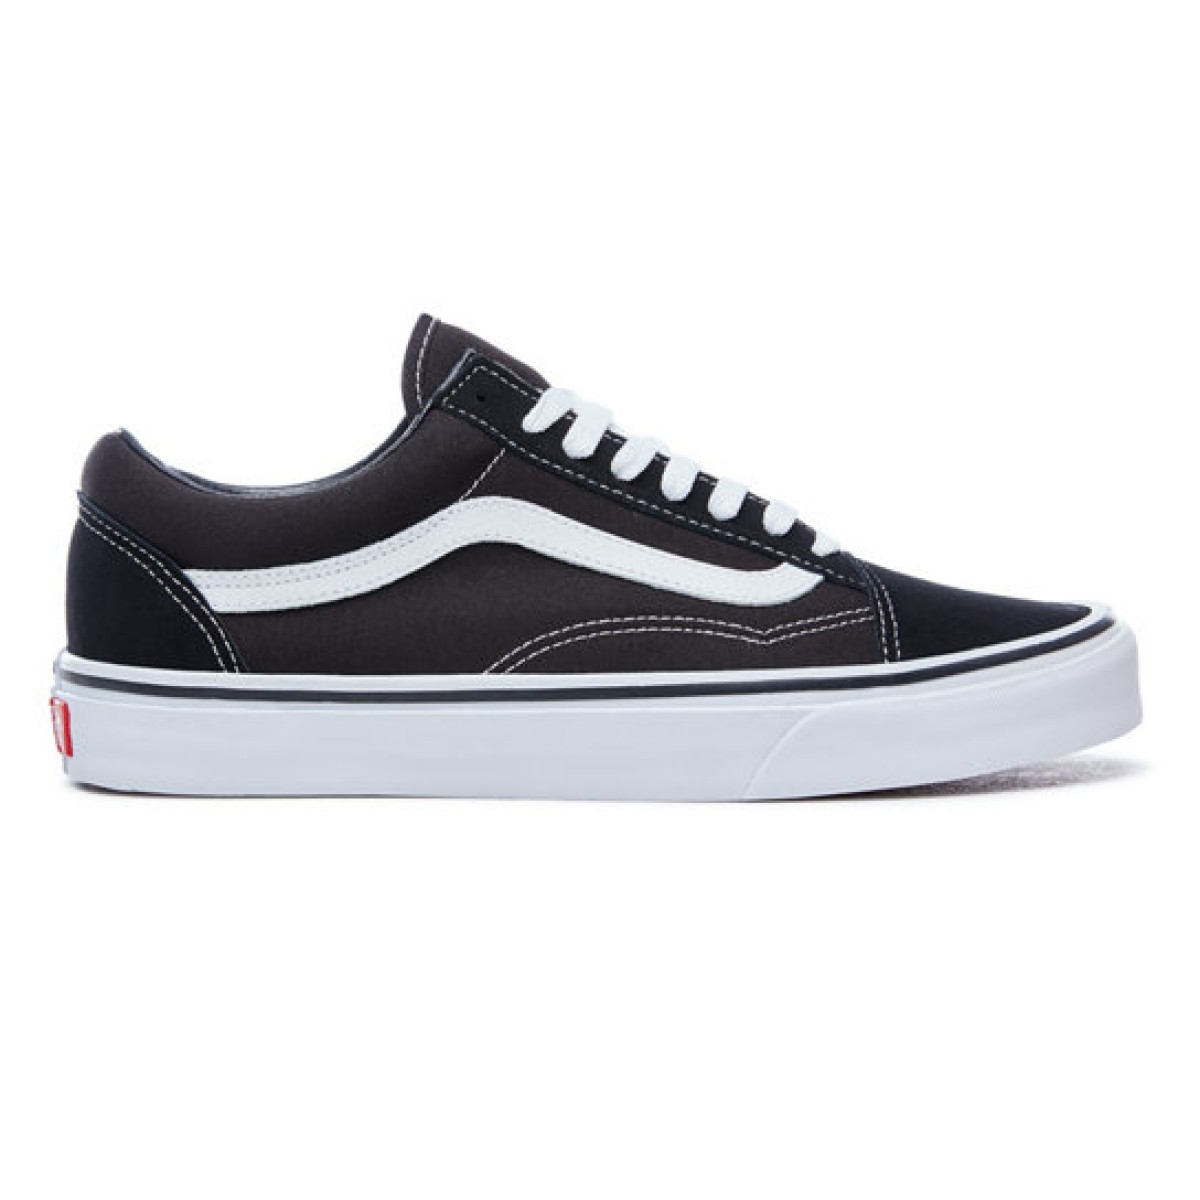 Vans Old Skool Black / White The first to bear the iconic side stripe ...